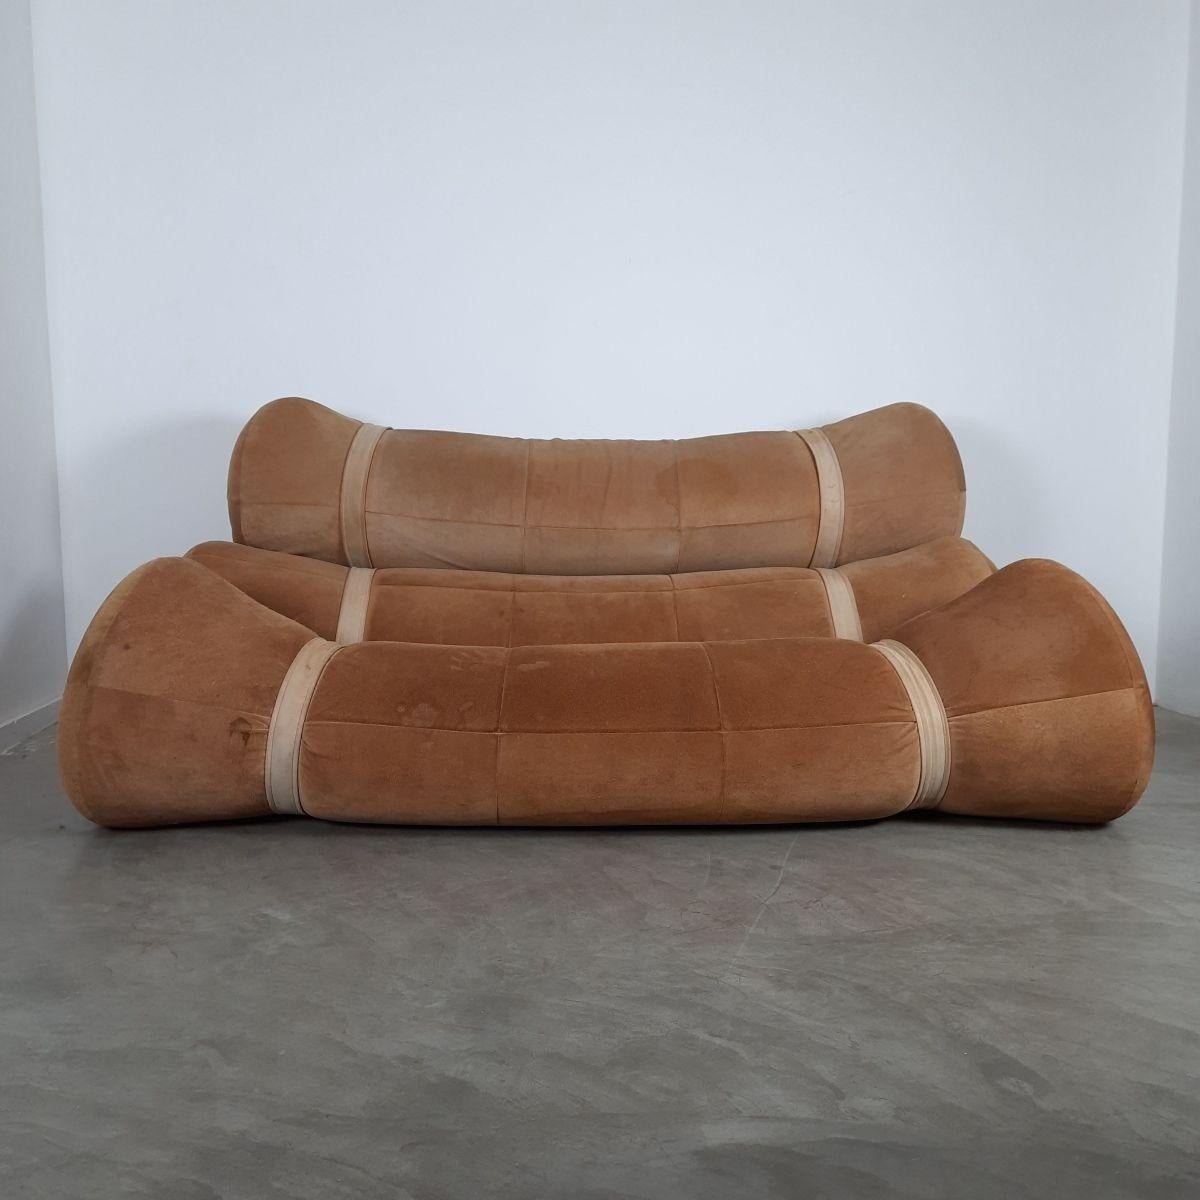 Extremely comfortable vintage Fardos sofa by the Brazilian designer Ricardo Fasanello. This is his first creation made in 1968. It consists of three large rolls of foam held together by straps on painted metal base structure. Upholstered with brown